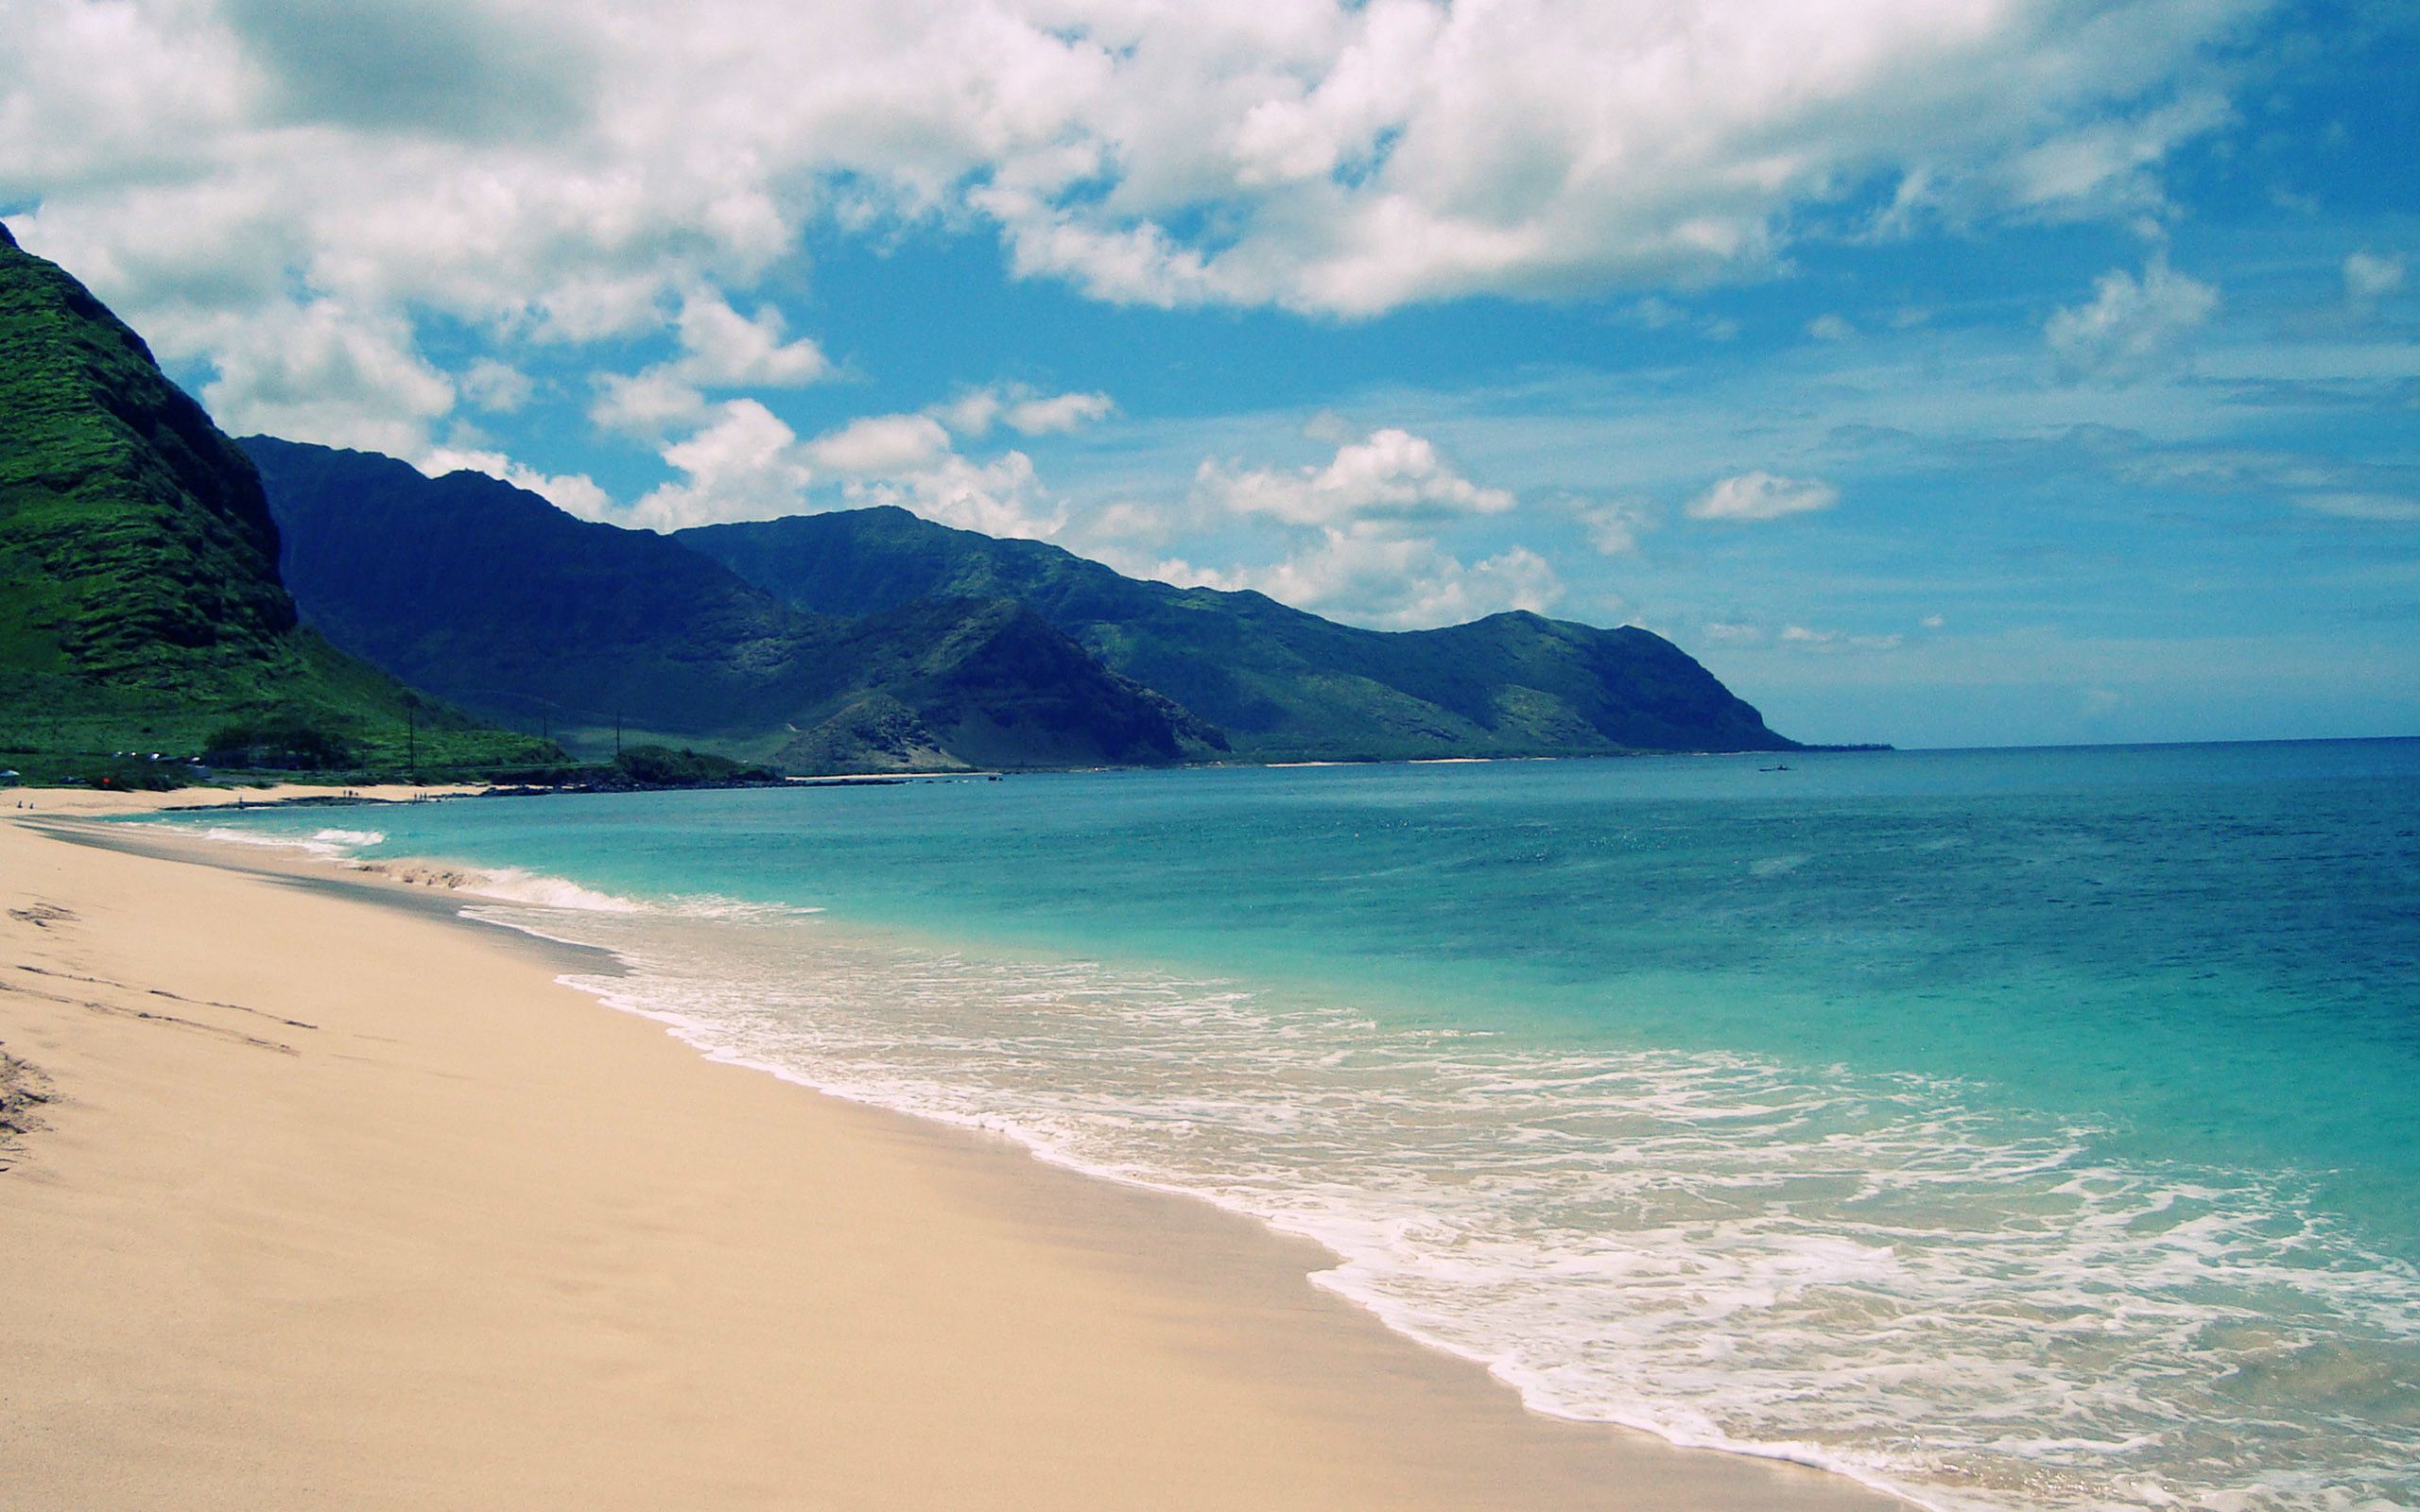 A beach with a mountain in the background - Hawaii, beach